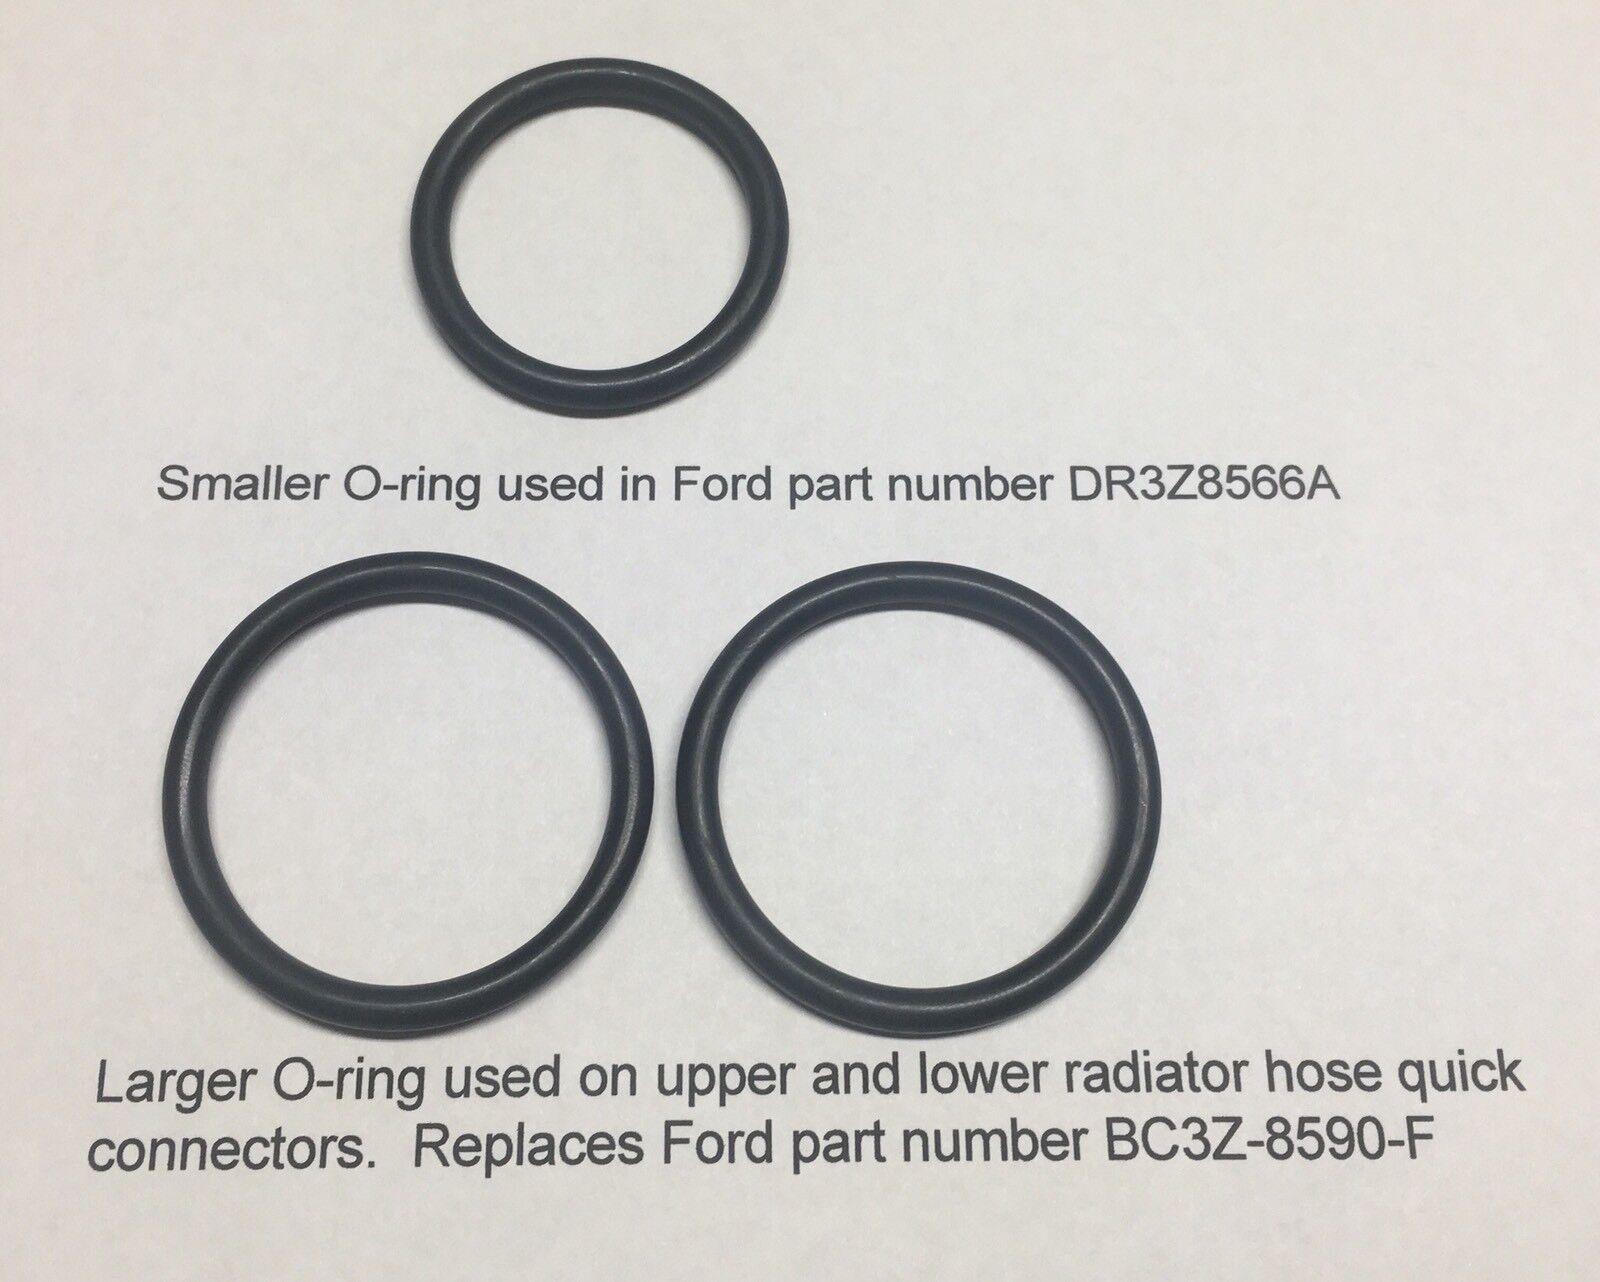 Replacement O-Rings for Ford DR-3Z8566-A and 2x BC3Z-8590-F    F150 coolant leak